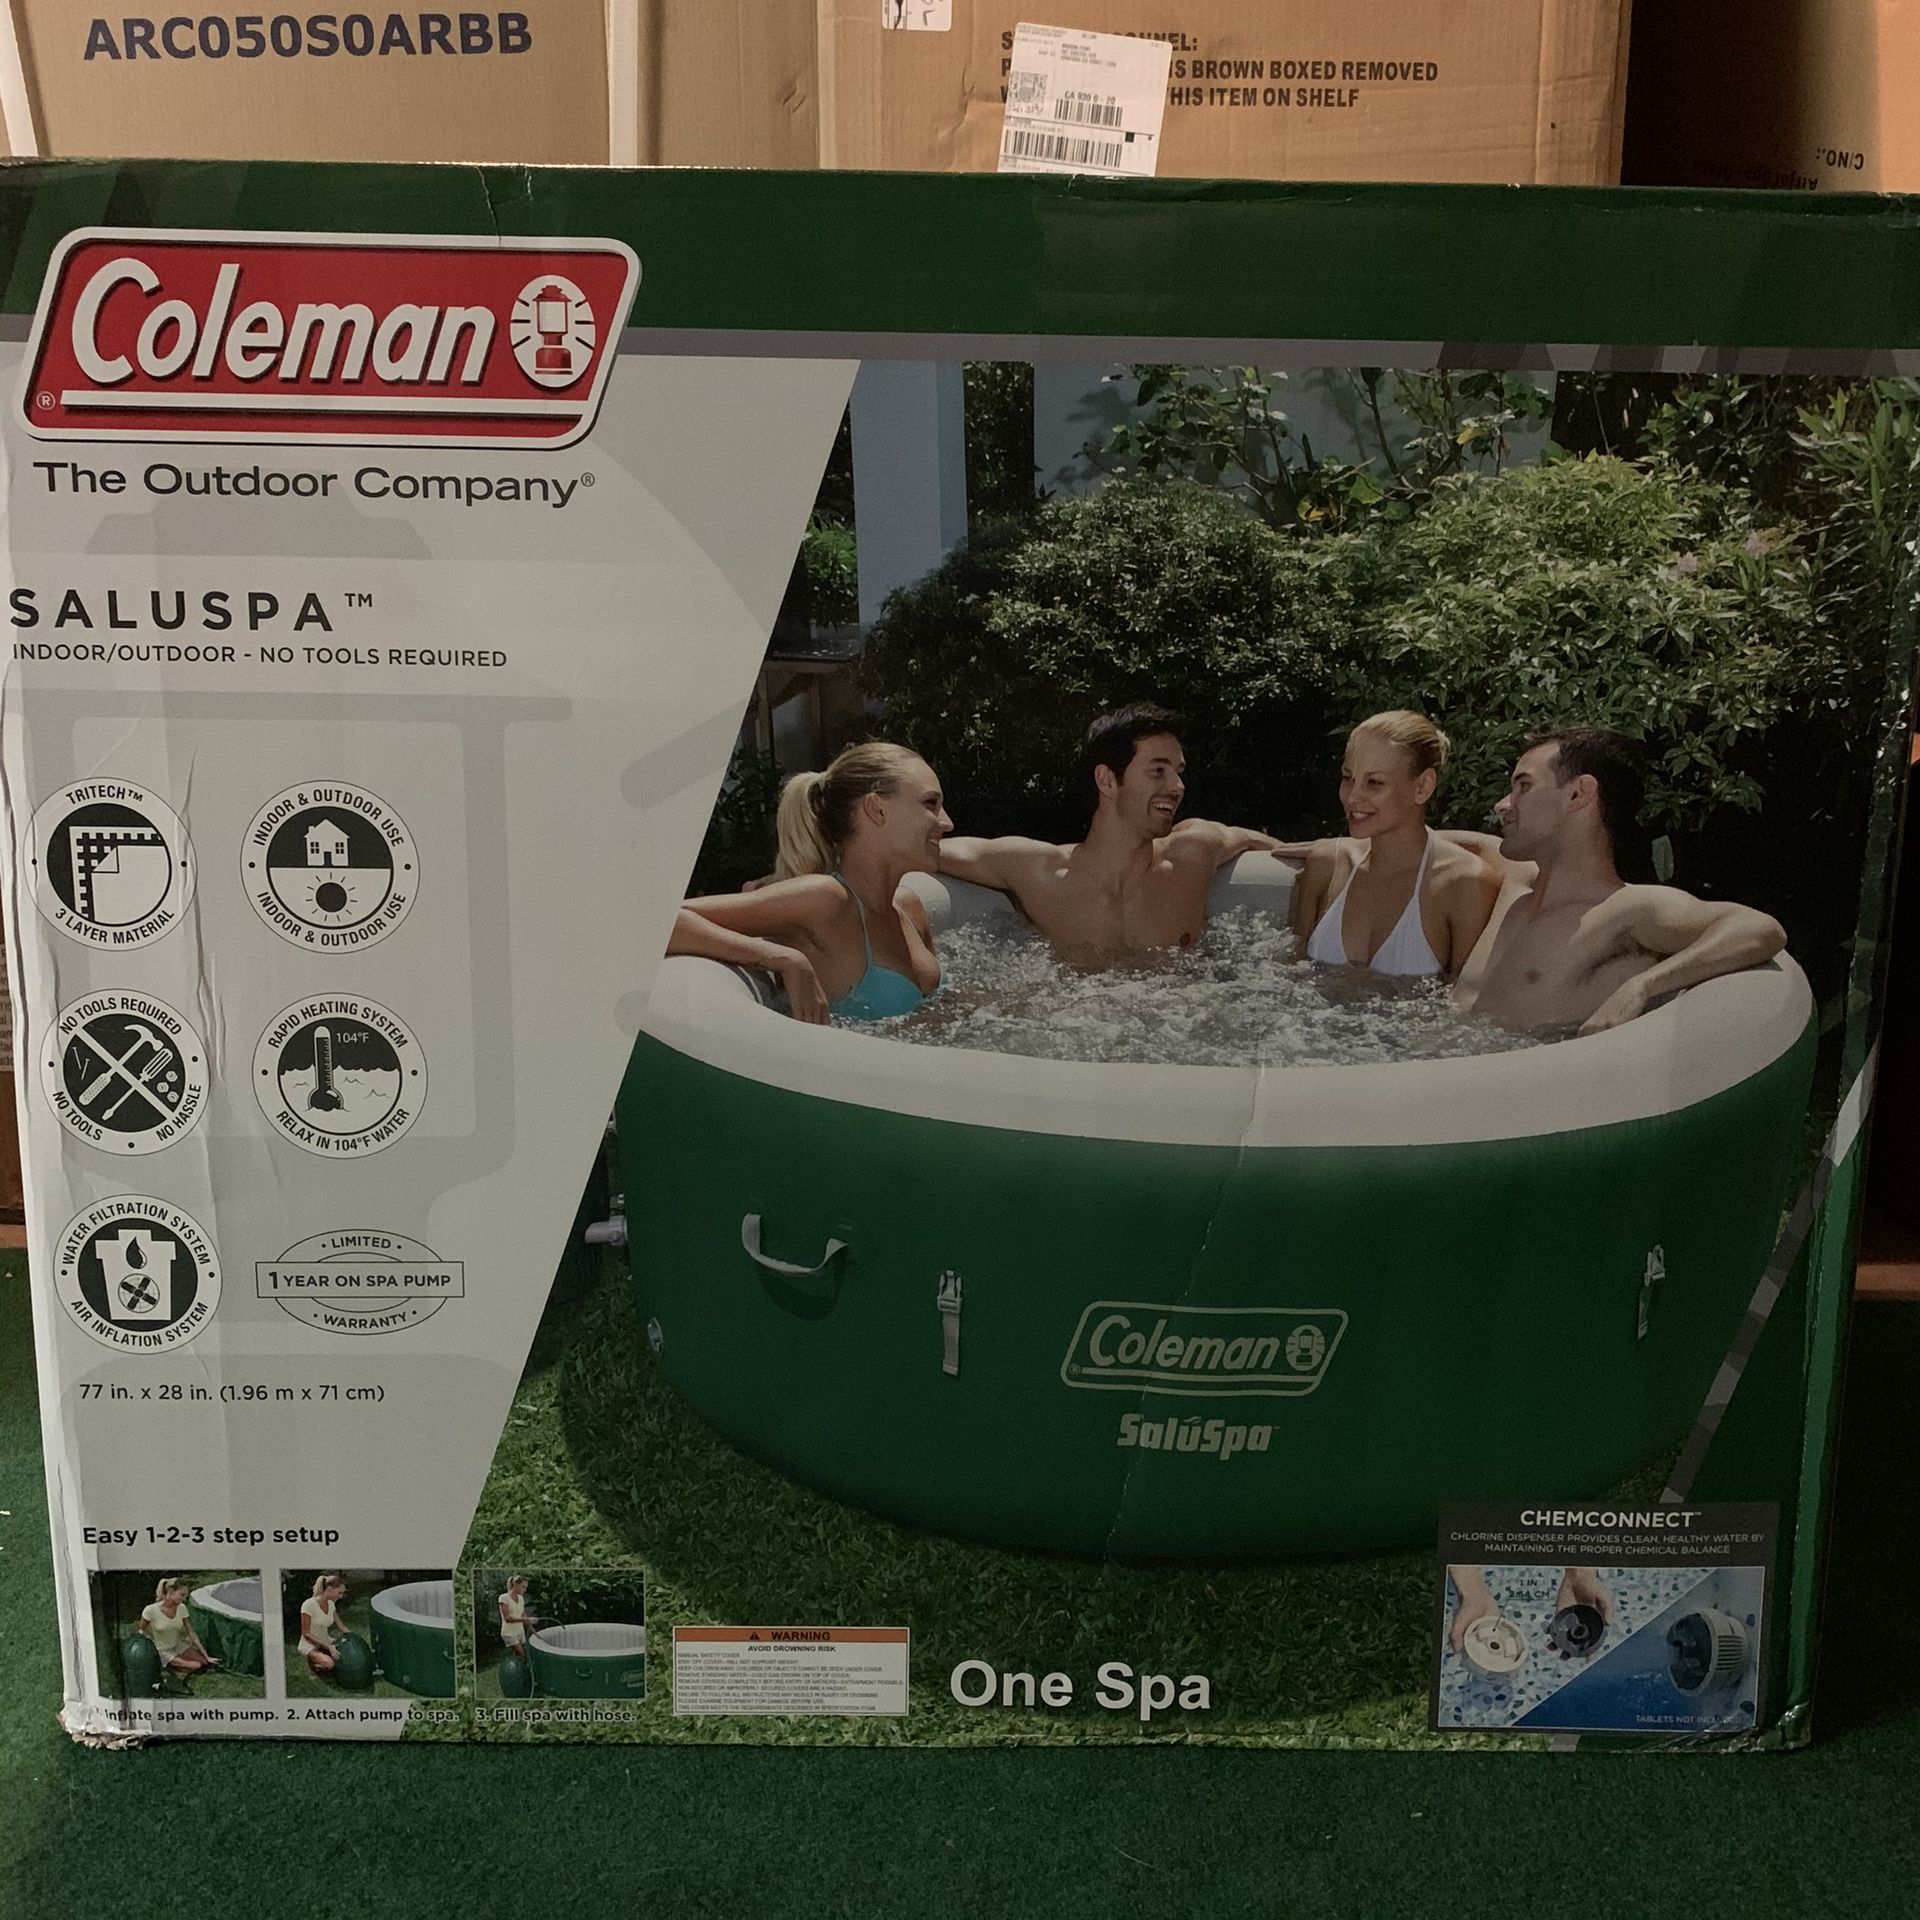 Coleman SaluSpa Inflatable Hot Tub Spa MSG OFFERS 